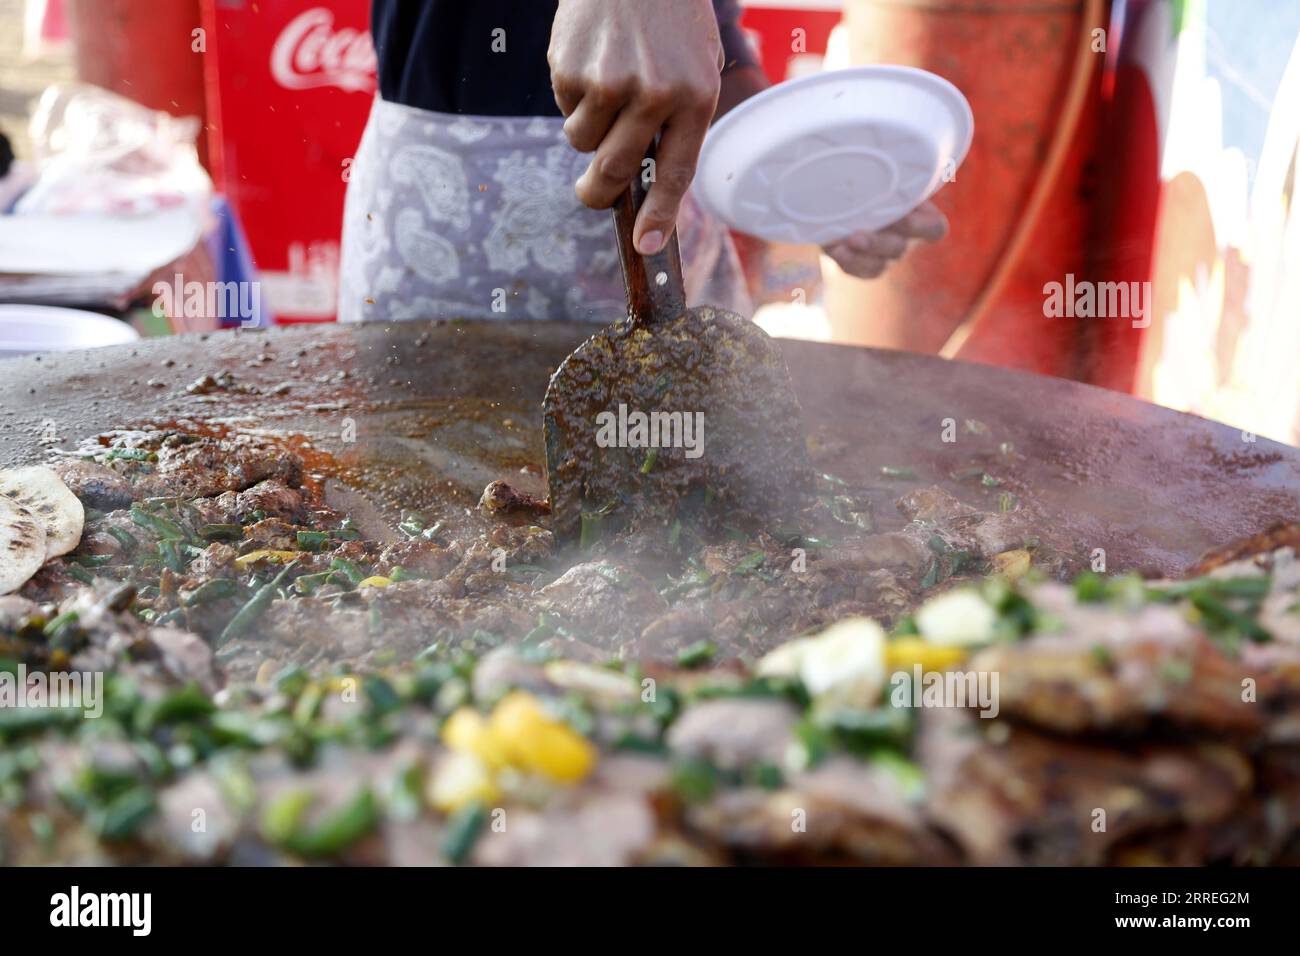 220227 -- ISLAMABAD, Feb. 27, 2022 -- A chef prepares food during Islamabad Eat food festival in Islamabad, capital of Pakistan, Feb. 26, 2022. Islamabad Eat, a famous food festival of the Pakistani capital, returned to the city in its true spirit, after a two-year absence induced by the outbreak of COVID-19, which halted many other excursion and sports activities in the country besides the festival.  PAKISTAN-ISLAMABAD-COVID-19-FOOD FESTIVAL AhmadxKamal PUBLICATIONxNOTxINxCHN Stock Photo